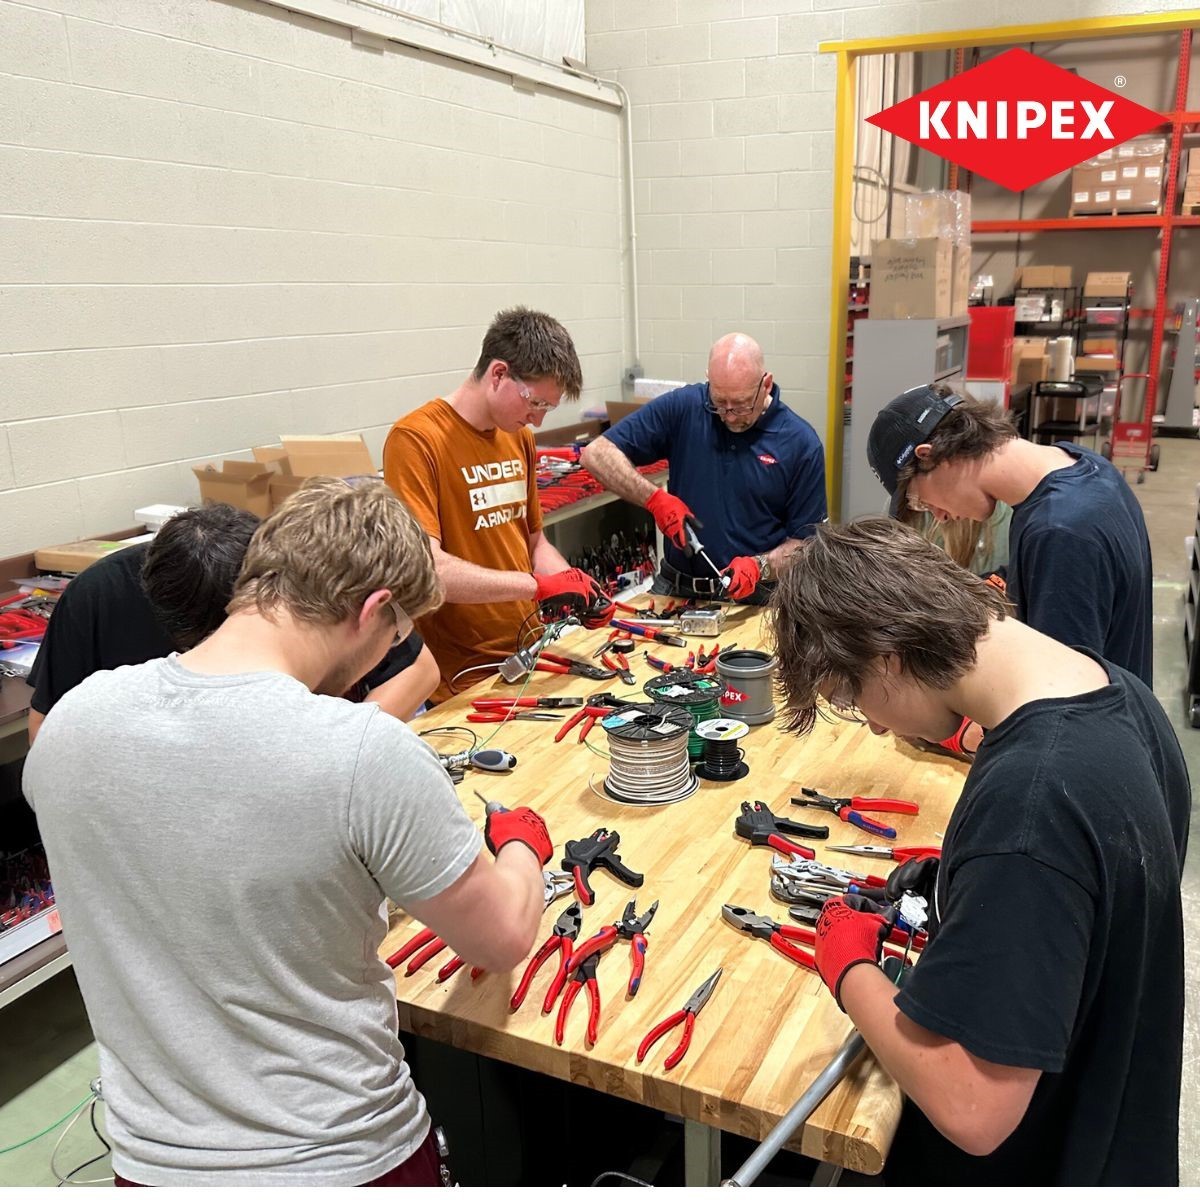 KTLP's Summer Employment Program offered many opportunities to learn, including a hands-on workshop using KNIPEX tools.